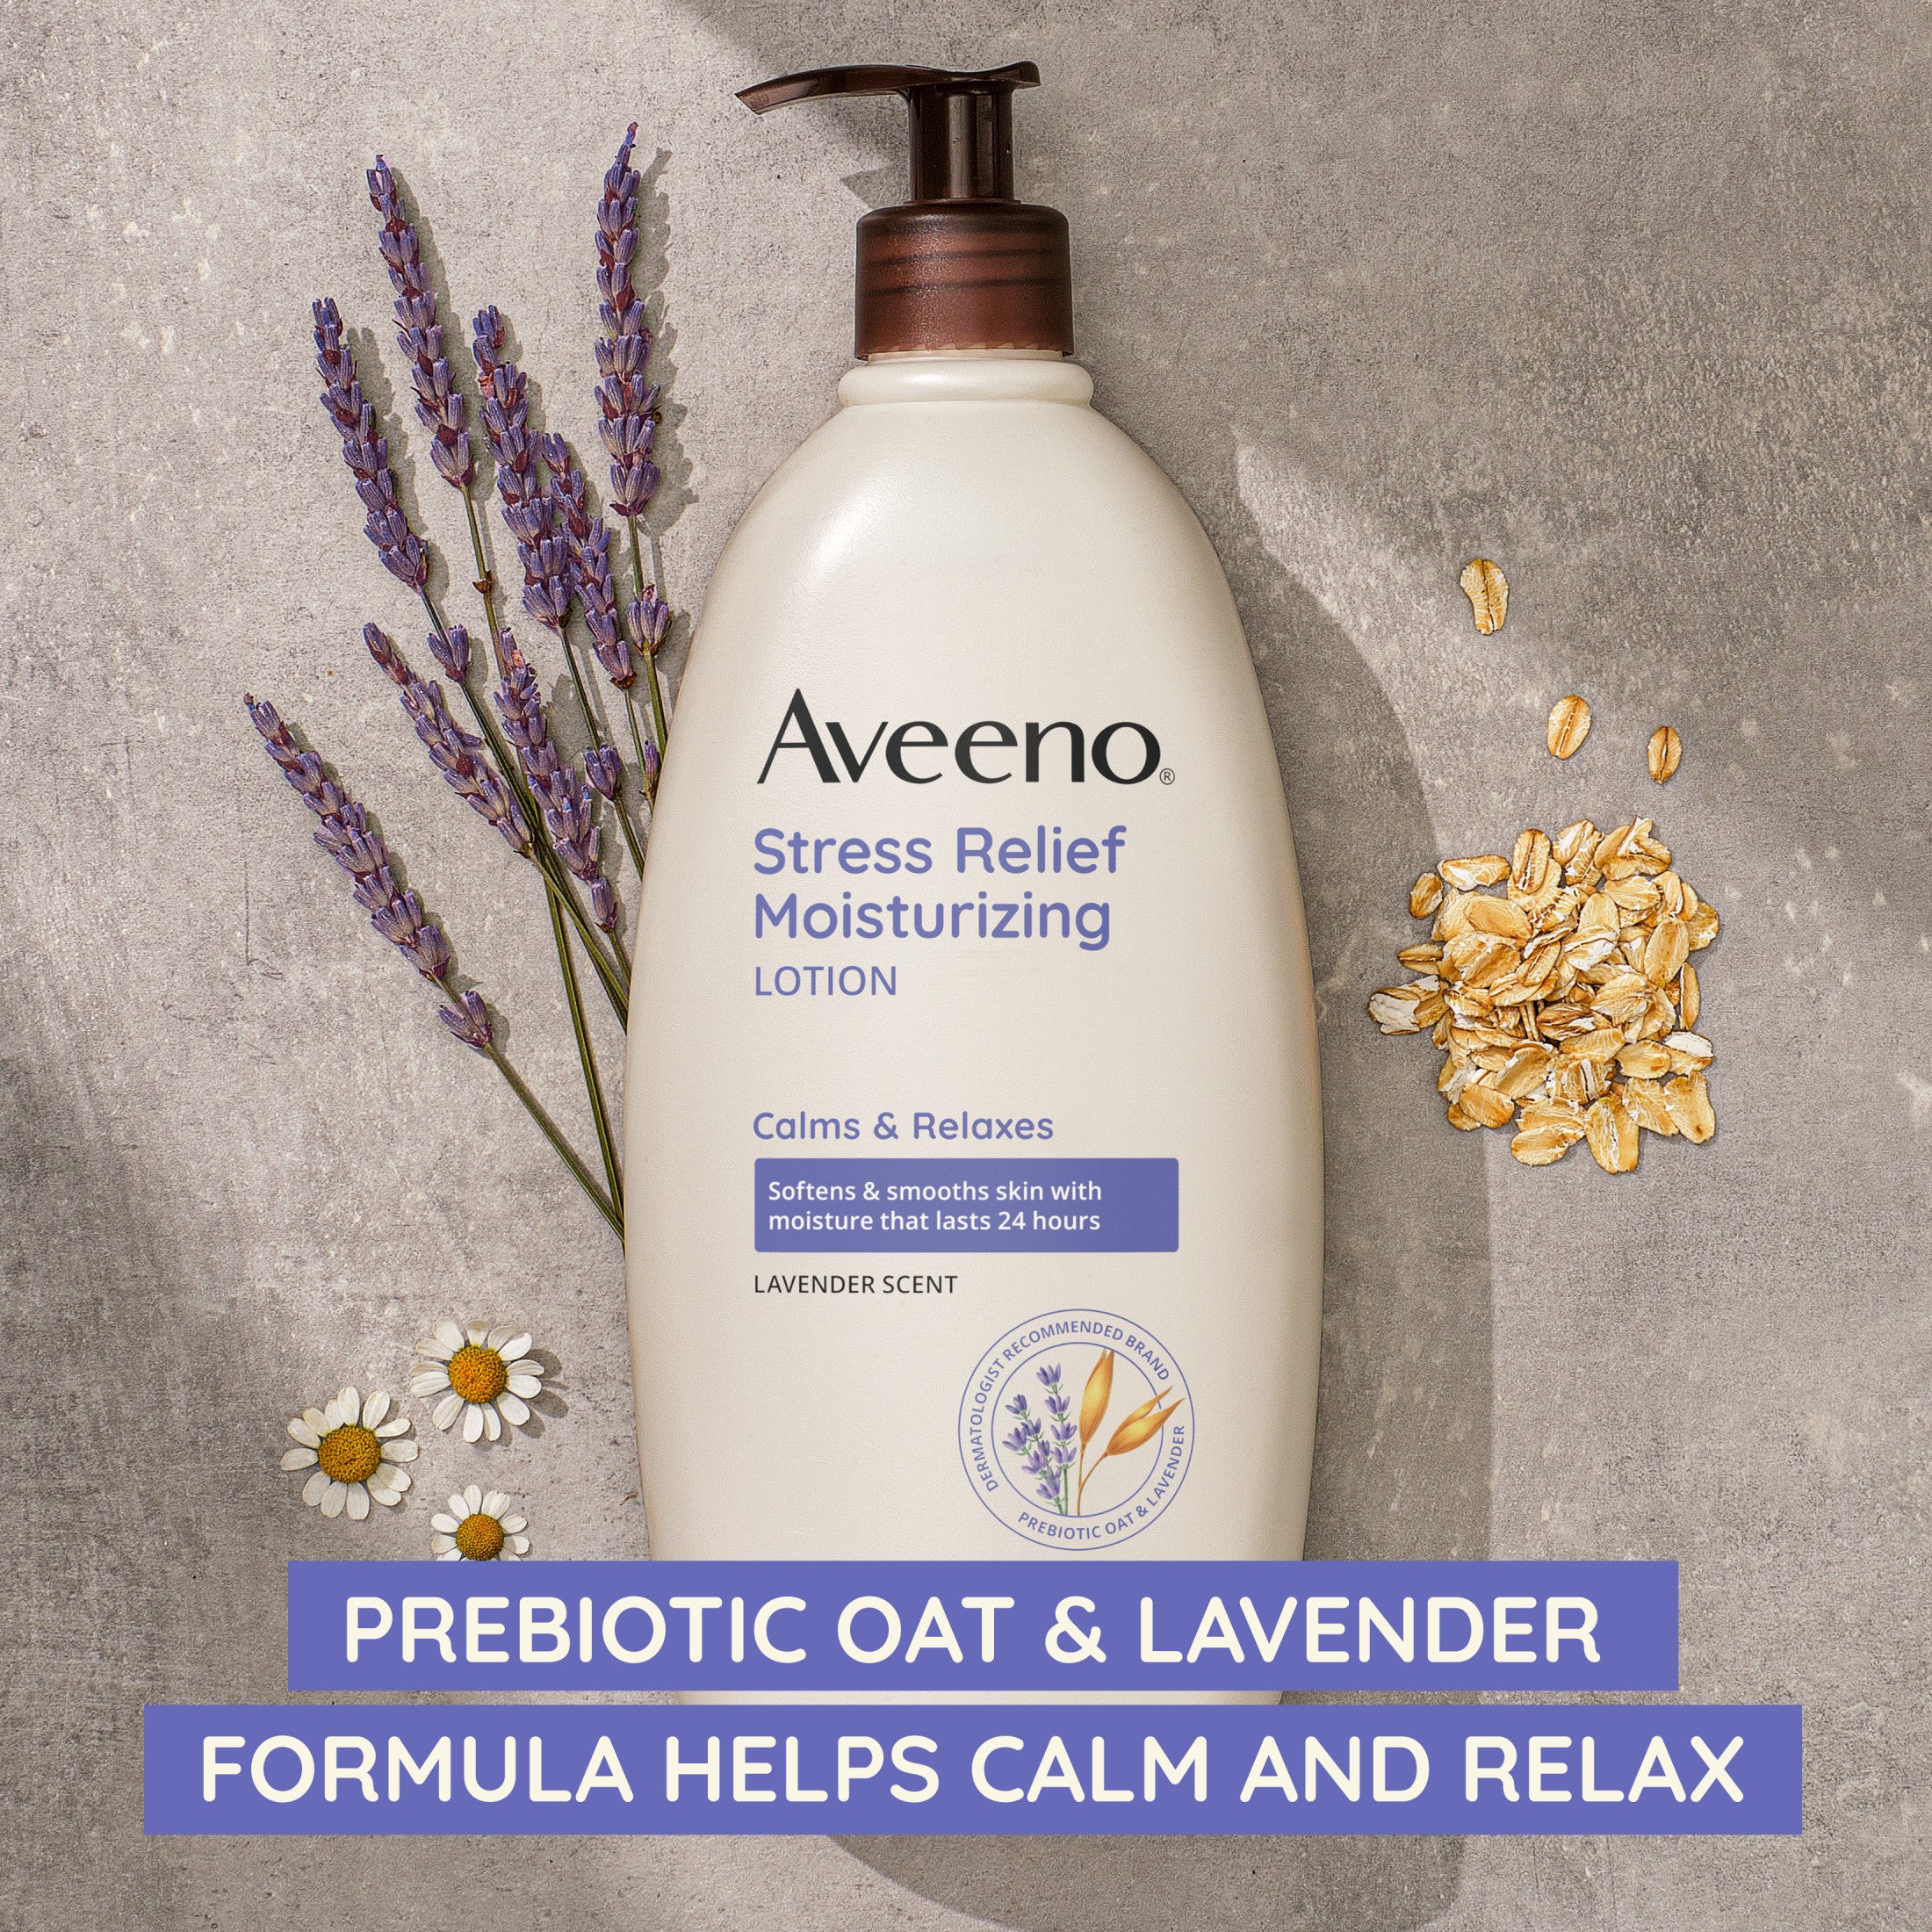 Aveeno Stress Relief Moisturizing Body and Hand Lotion with Prebiotic Oat, Lavender Scent, 18 oz | MTTS341